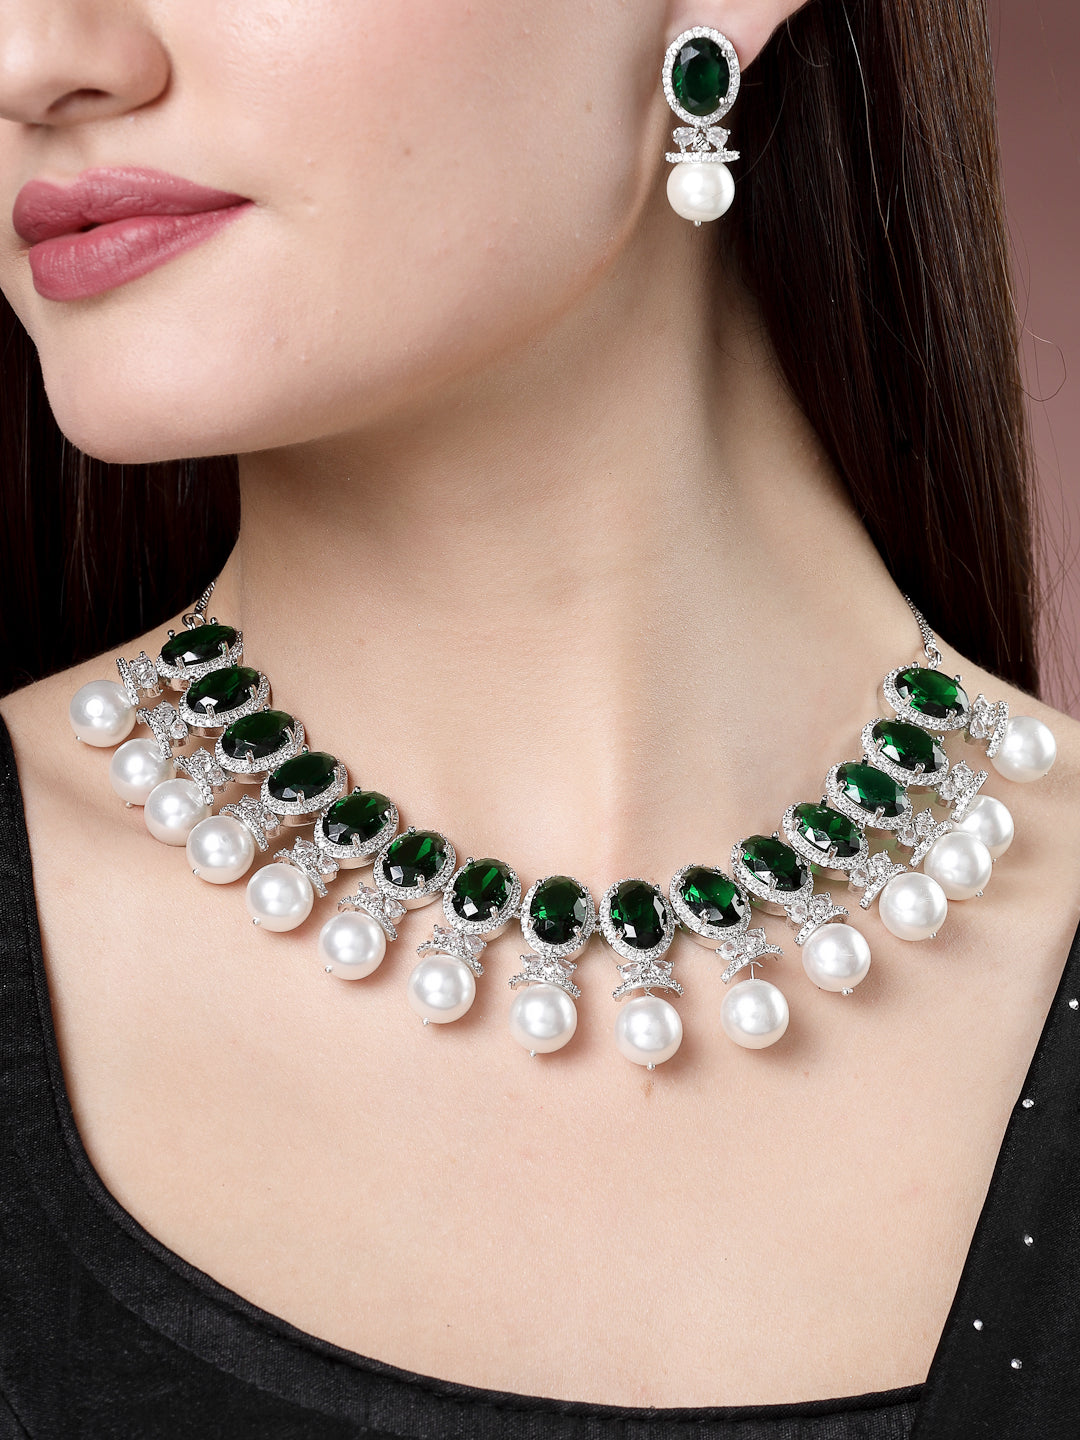 Women's Silver-Plated Green American Diamond Studded Handcrafted Jewellery Set - Nvr